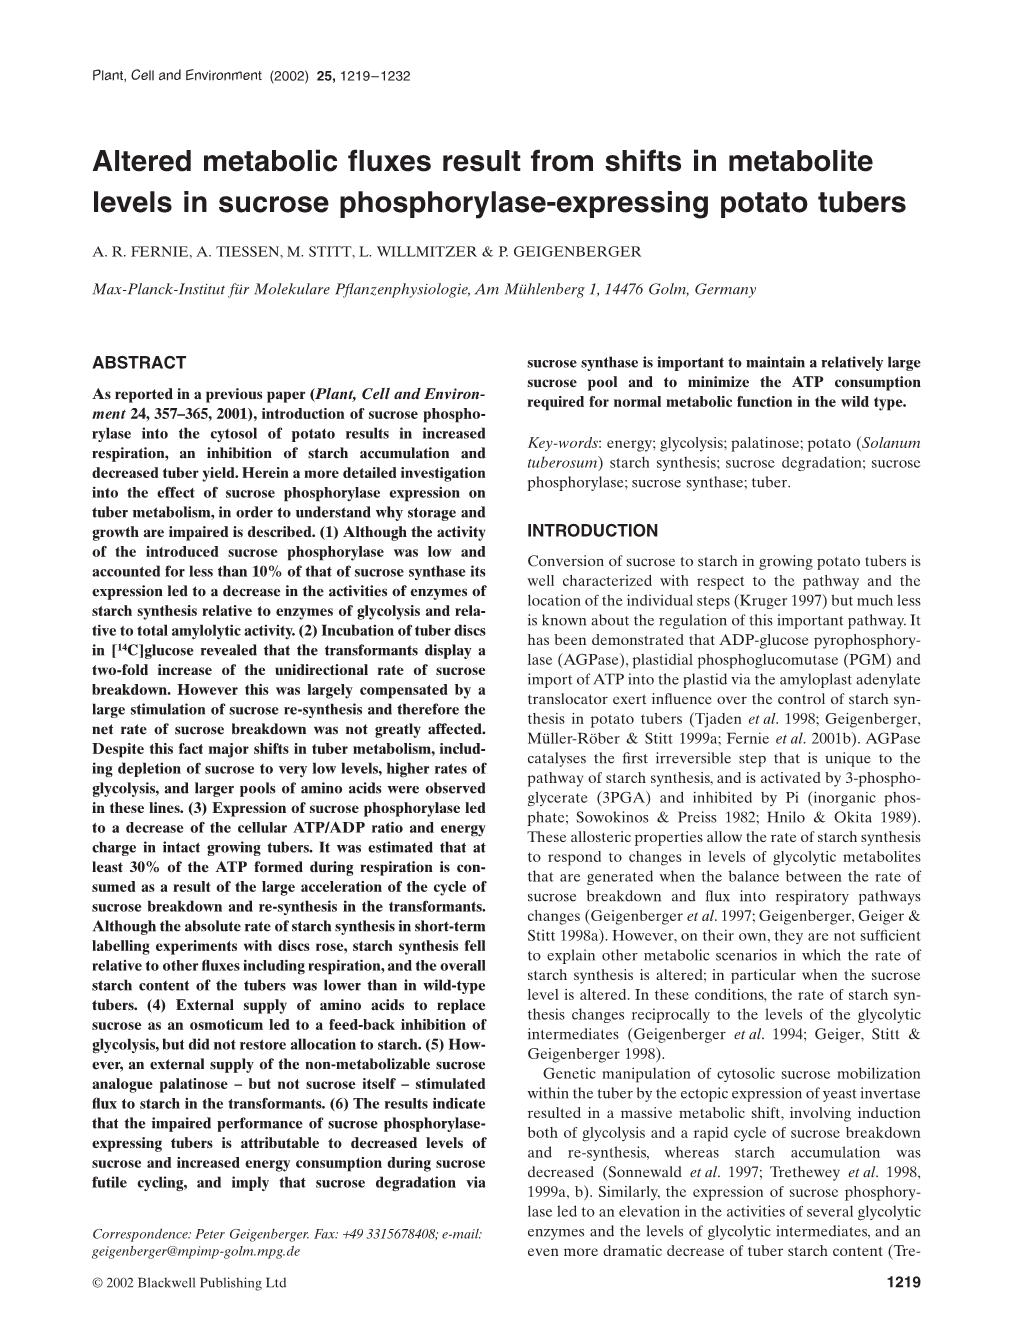 Altered Metabolic Fluxes Result from Shifts in Metabolite Levels in Sucrose